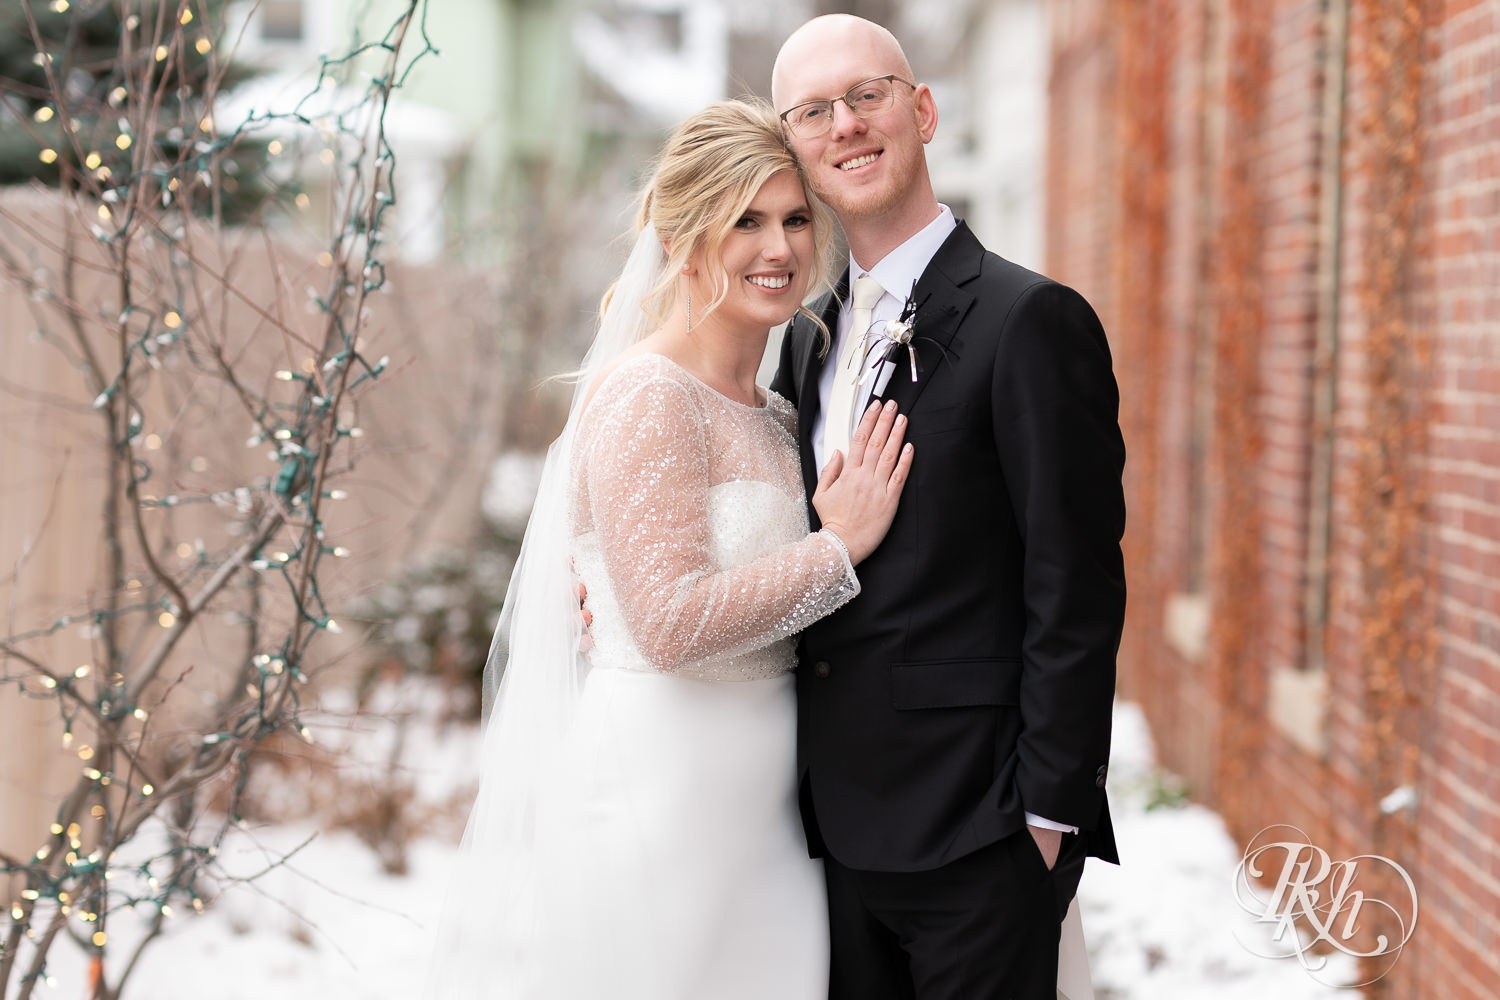 Bride and groom smile during winter wedding at Gatherings at Station 10 in Saint Paul, Minnesota.